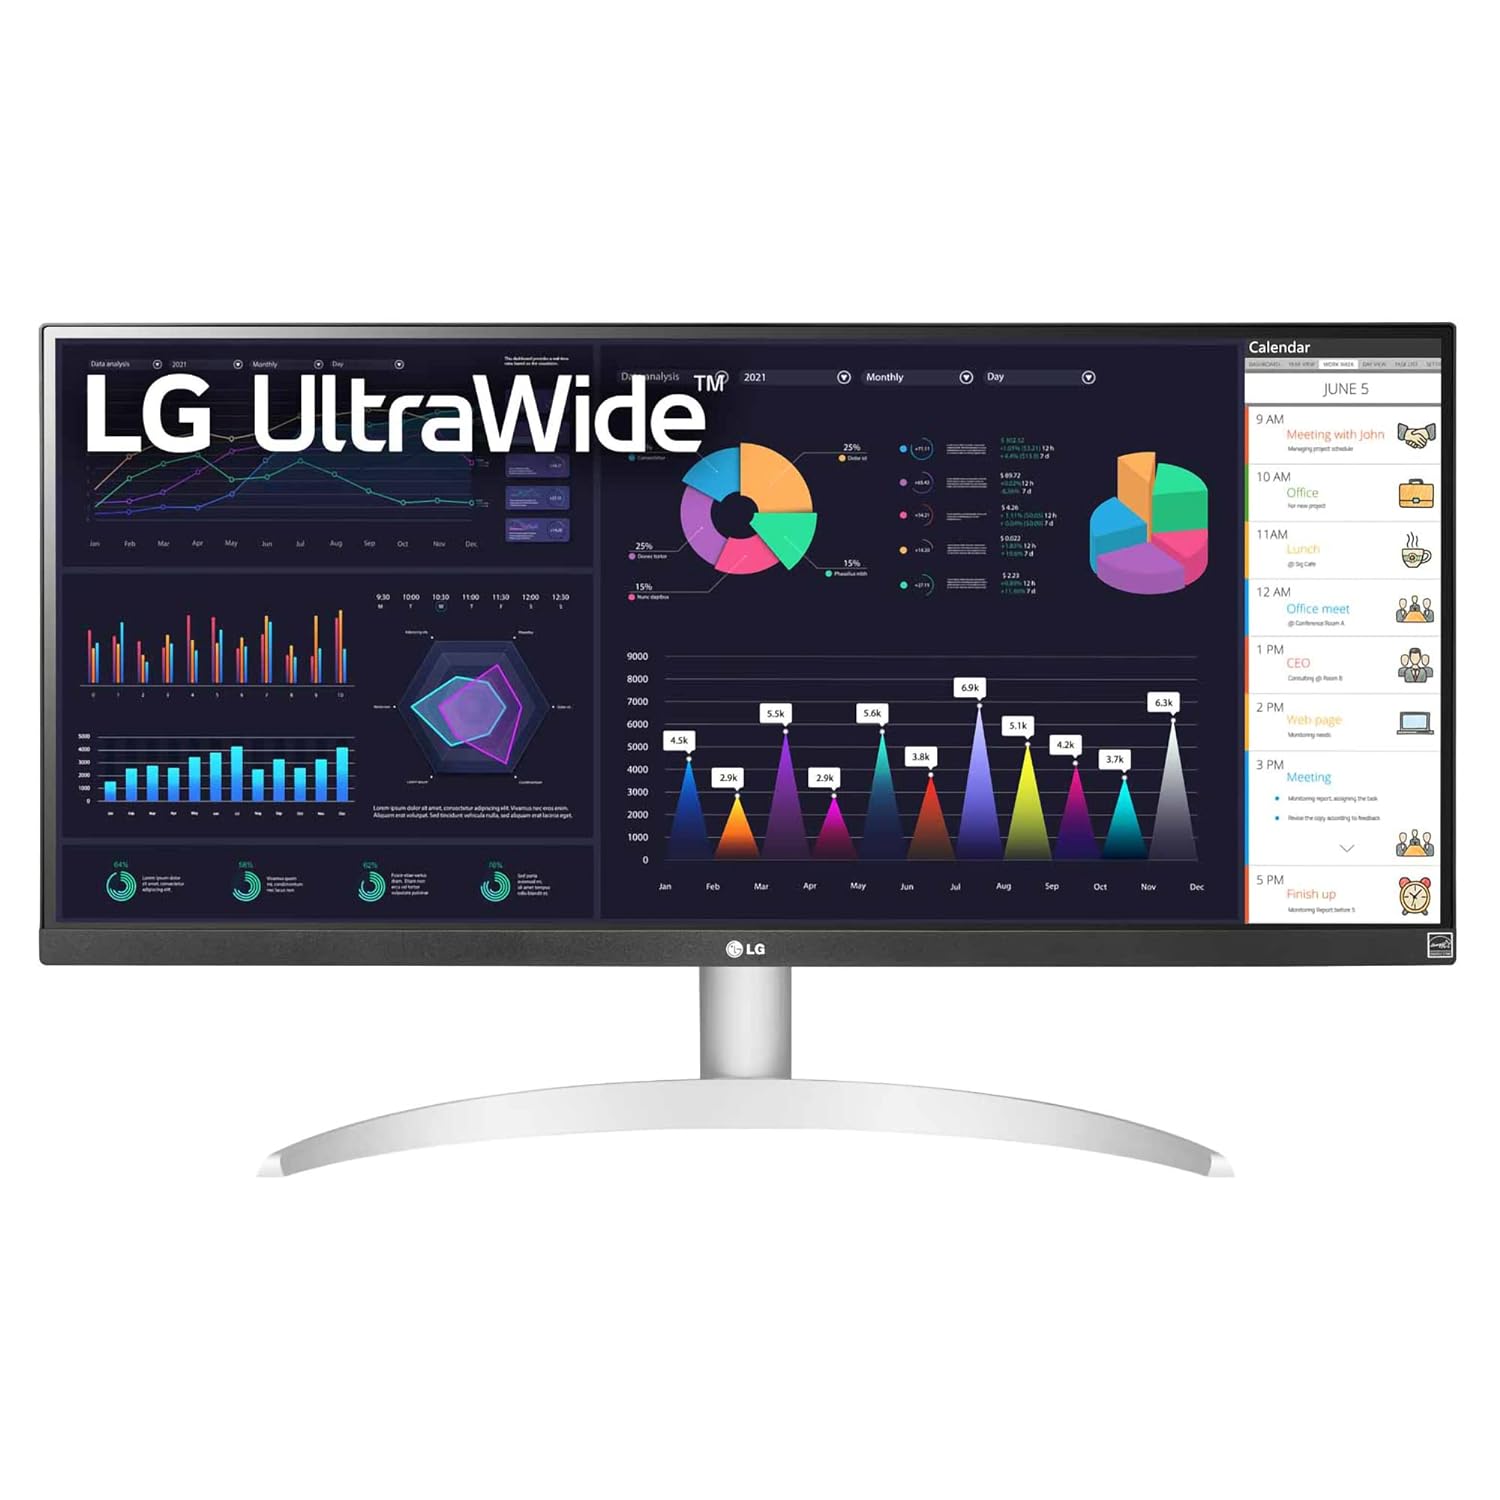 LG 29WQ600 UltraWide IPS Monitor 2560x1080 100Hz with HDMI, DP Port, and USB Type-C